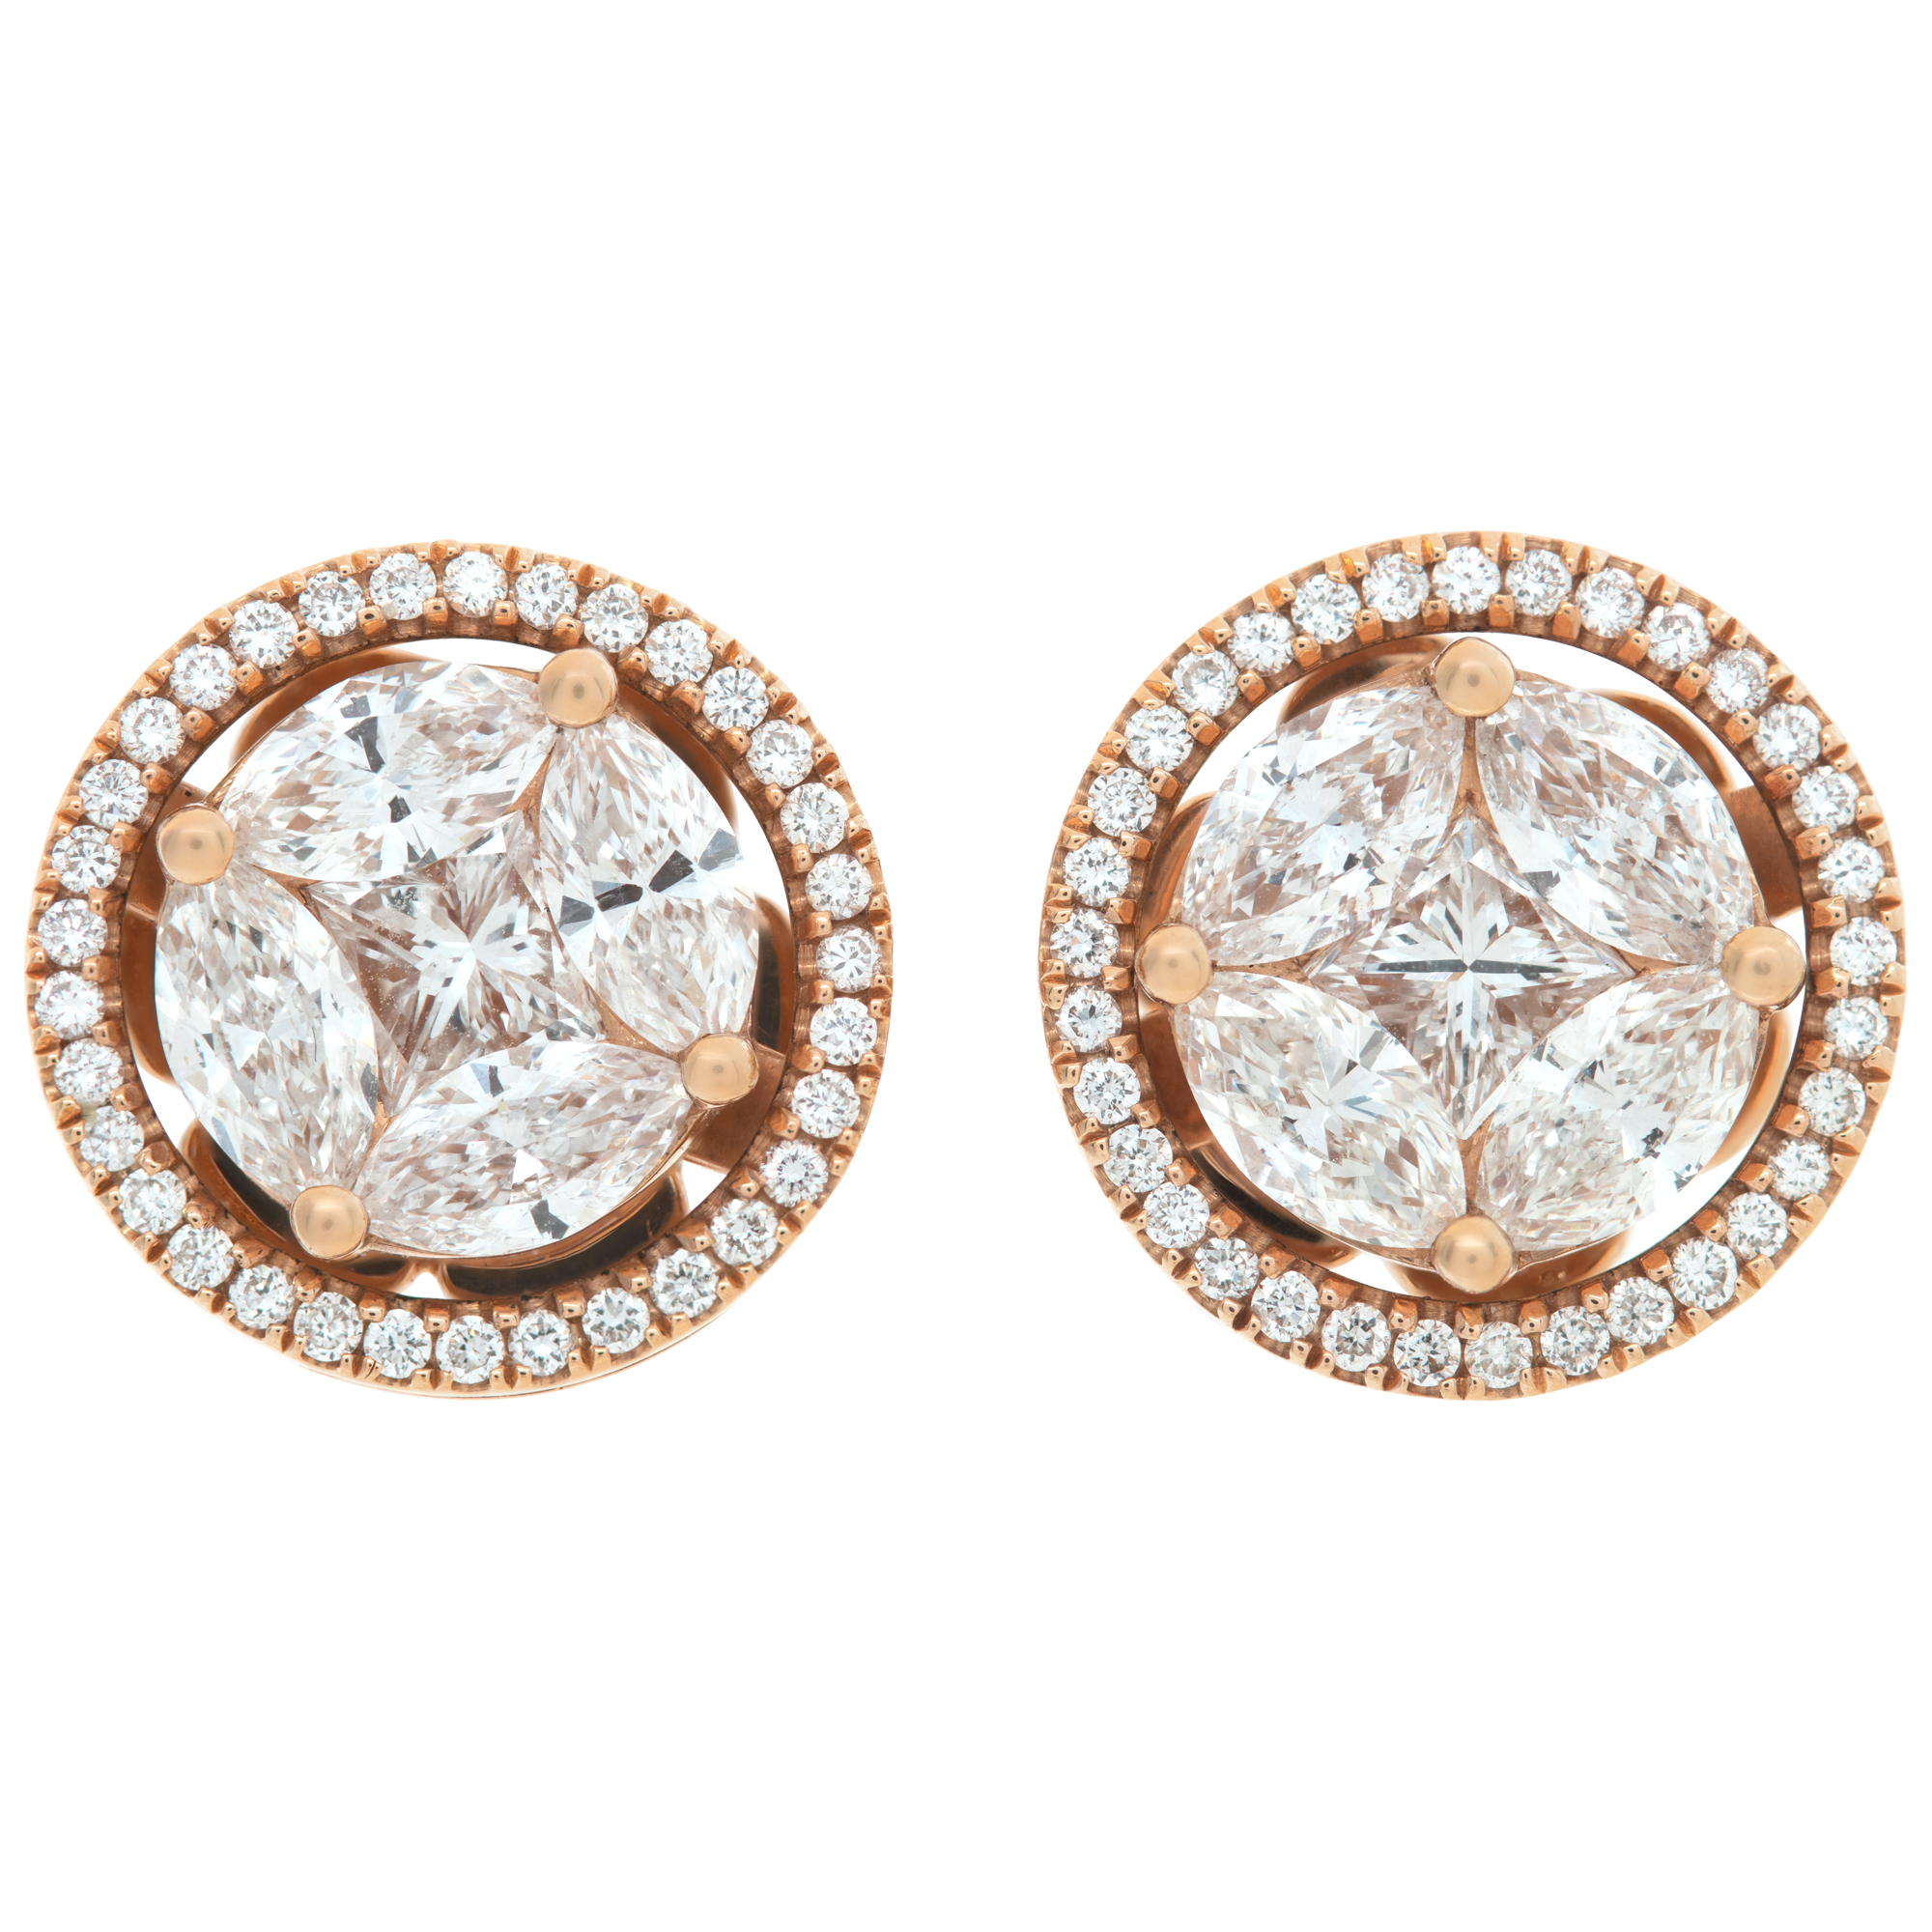 Halo illusion set diamond studs in 18k rose gold with 2.75 carats in diamonds